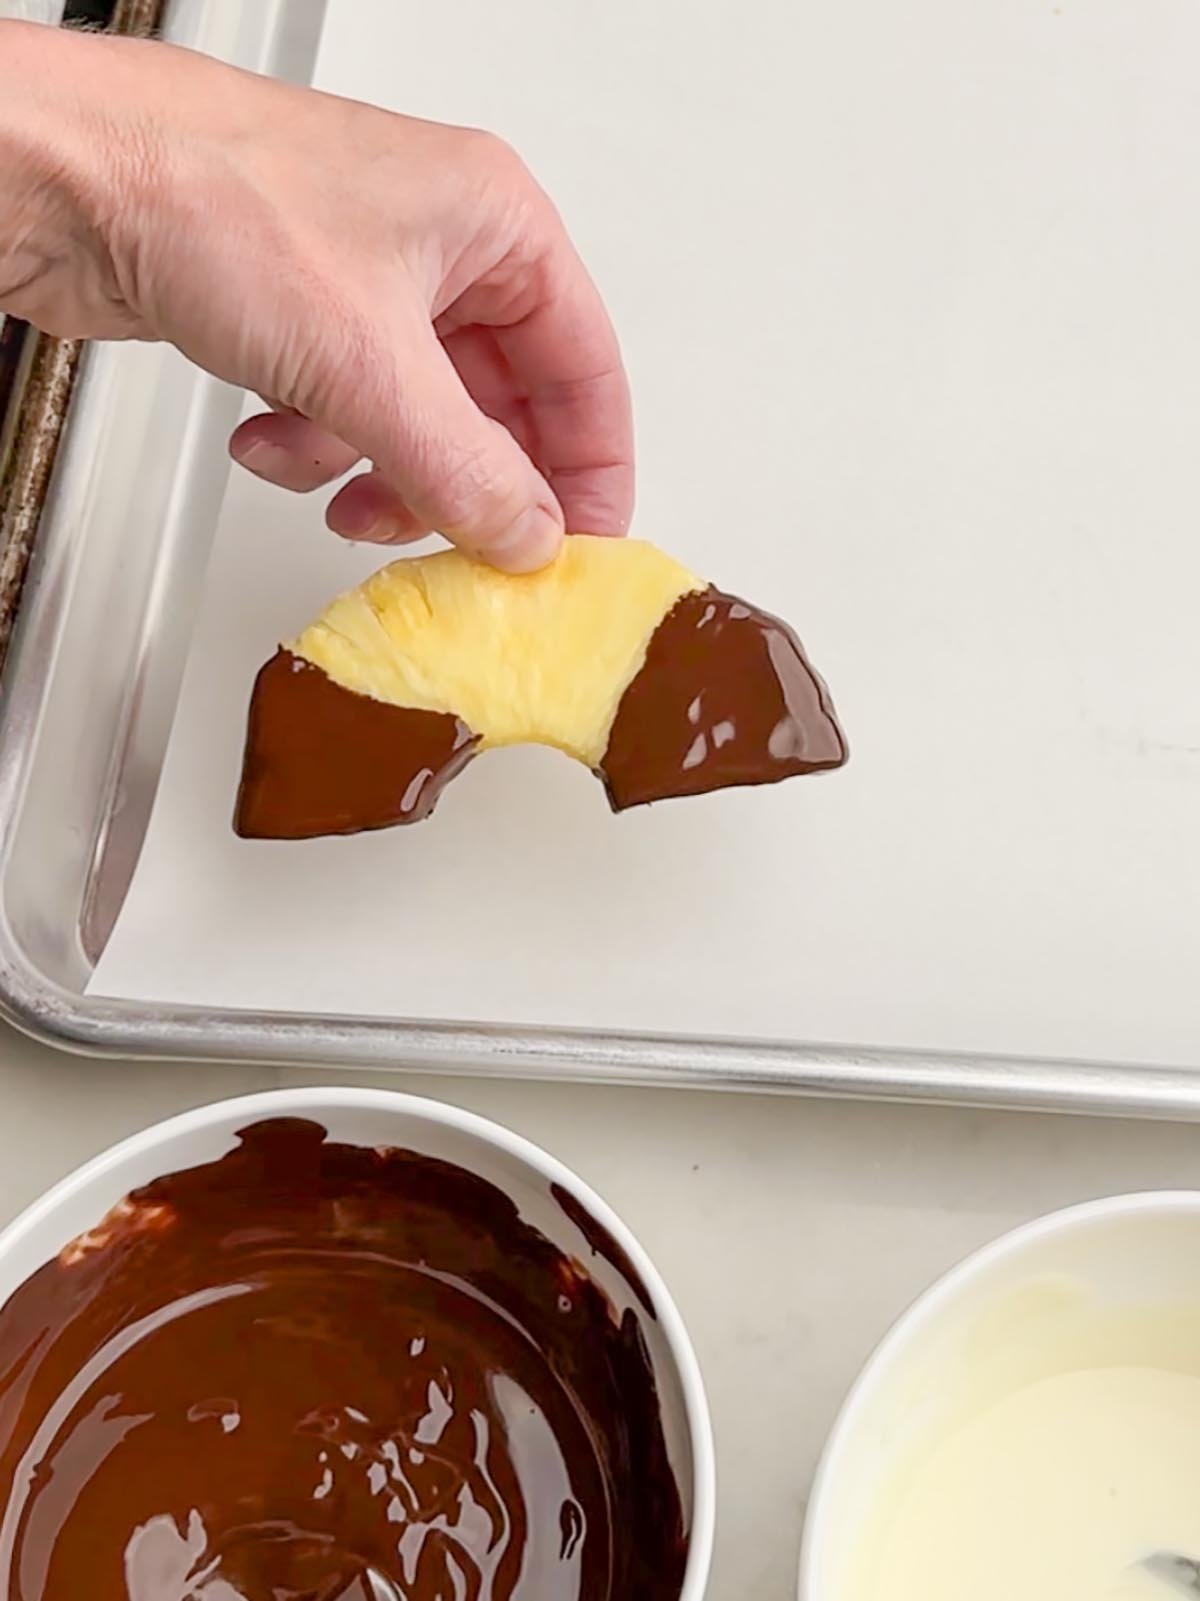 hand holding up a piece of chocolate covered pineapple